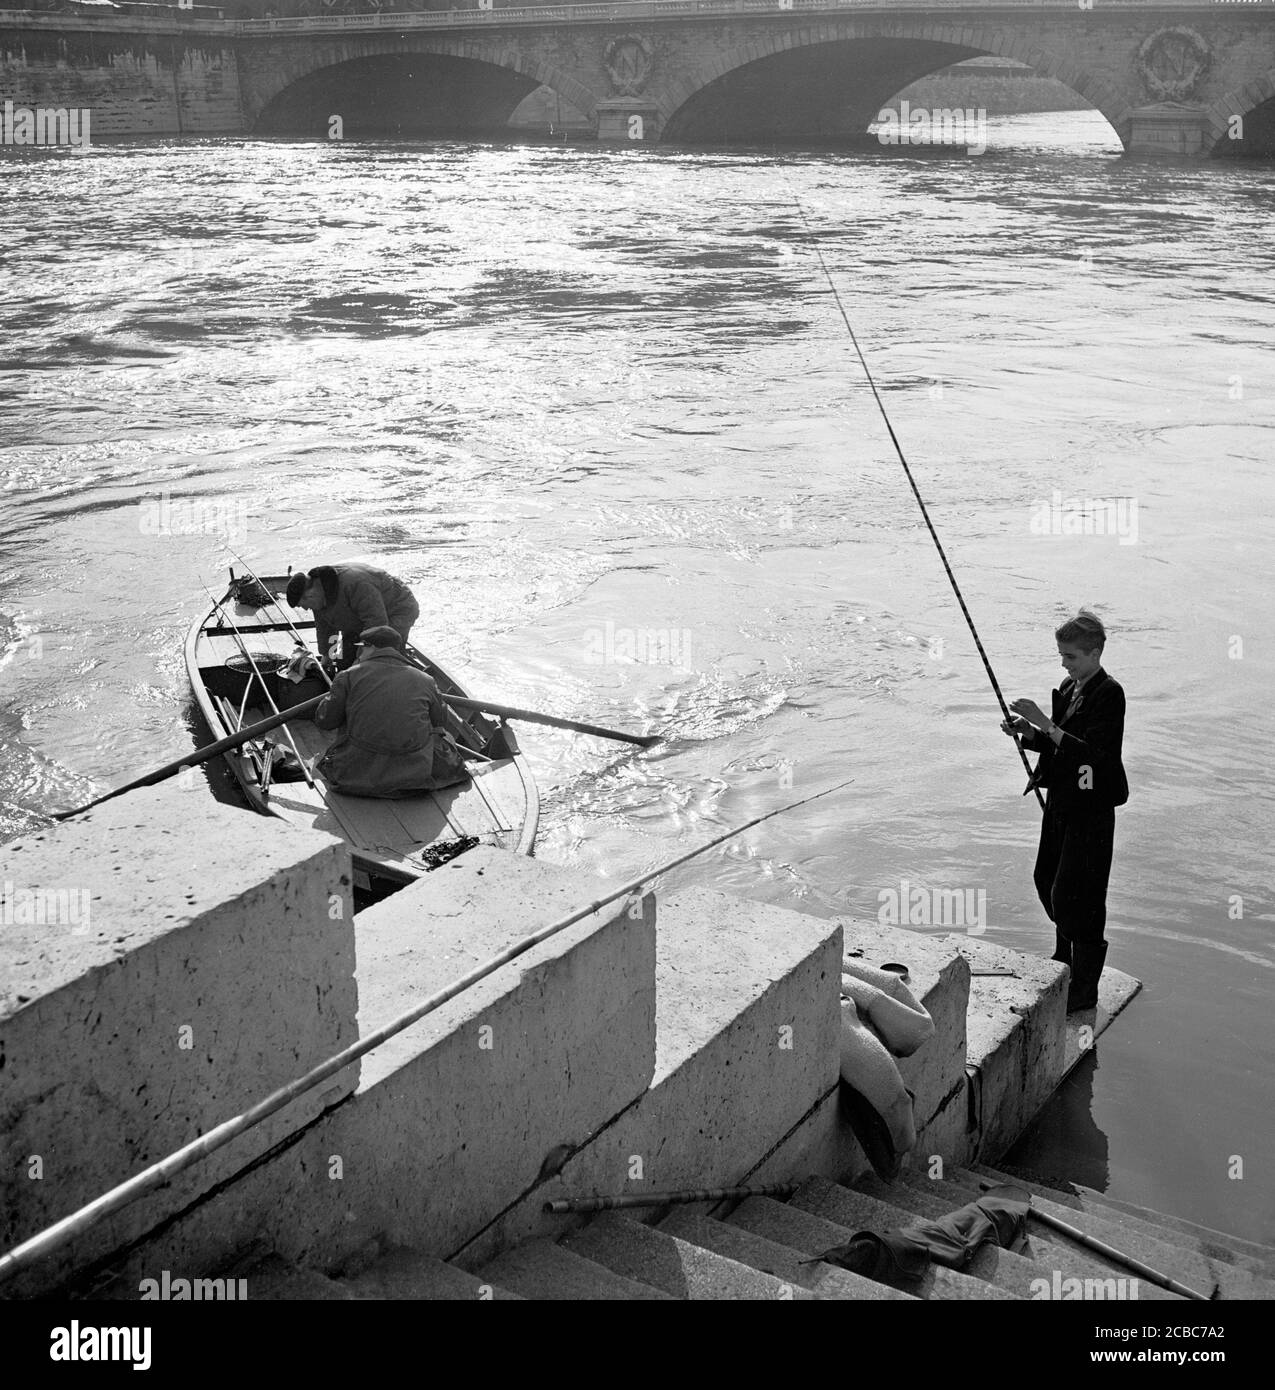 https://c8.alamy.com/comp/2CBC7A2/1950s-historical-paris-france-boy-with-fishing-rod-on-some-steps-down-by-the-river-seine-a-rowing-boat-with-two-men-and-a-fishing-net-sets-off-2CBC7A2.jpg